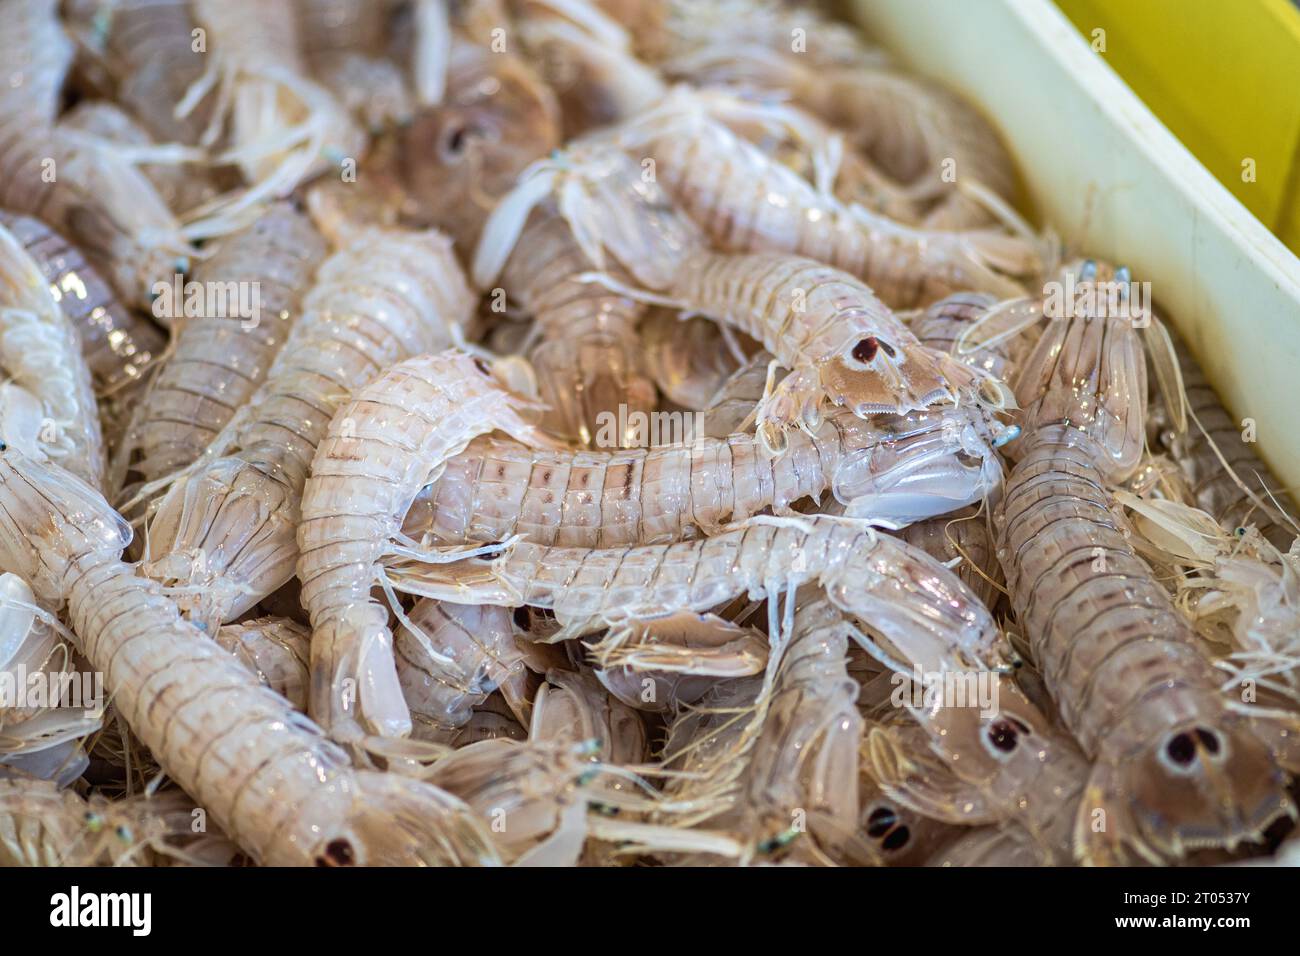 Squilla mantis, species of mantis shrimp found in shallow coastal areas of the Mediterranean Sea and the Eastern Atlantic Ocean: cicala or pacchero Stock Photo